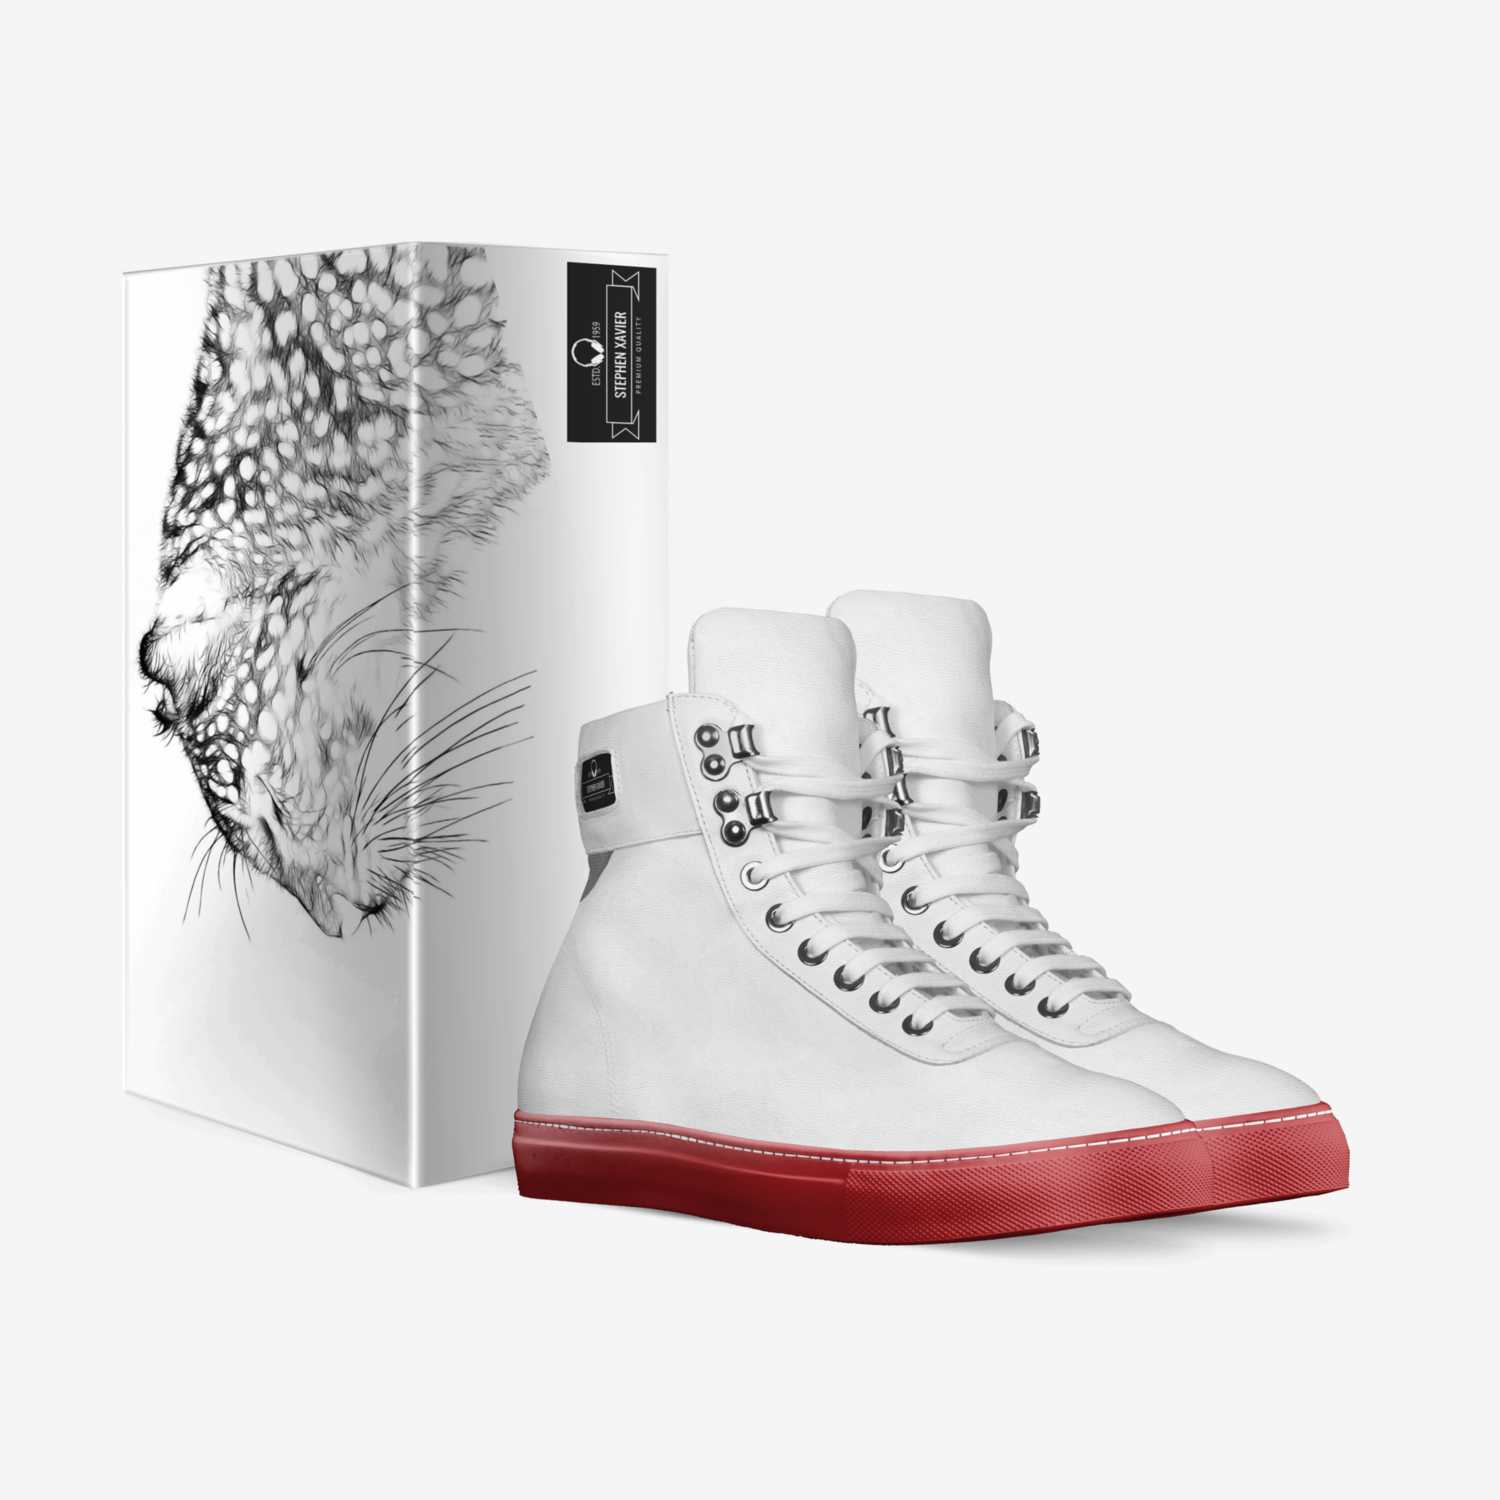 LYNX SNÖ custom made in Italy shoes by Steve Blast | Box view